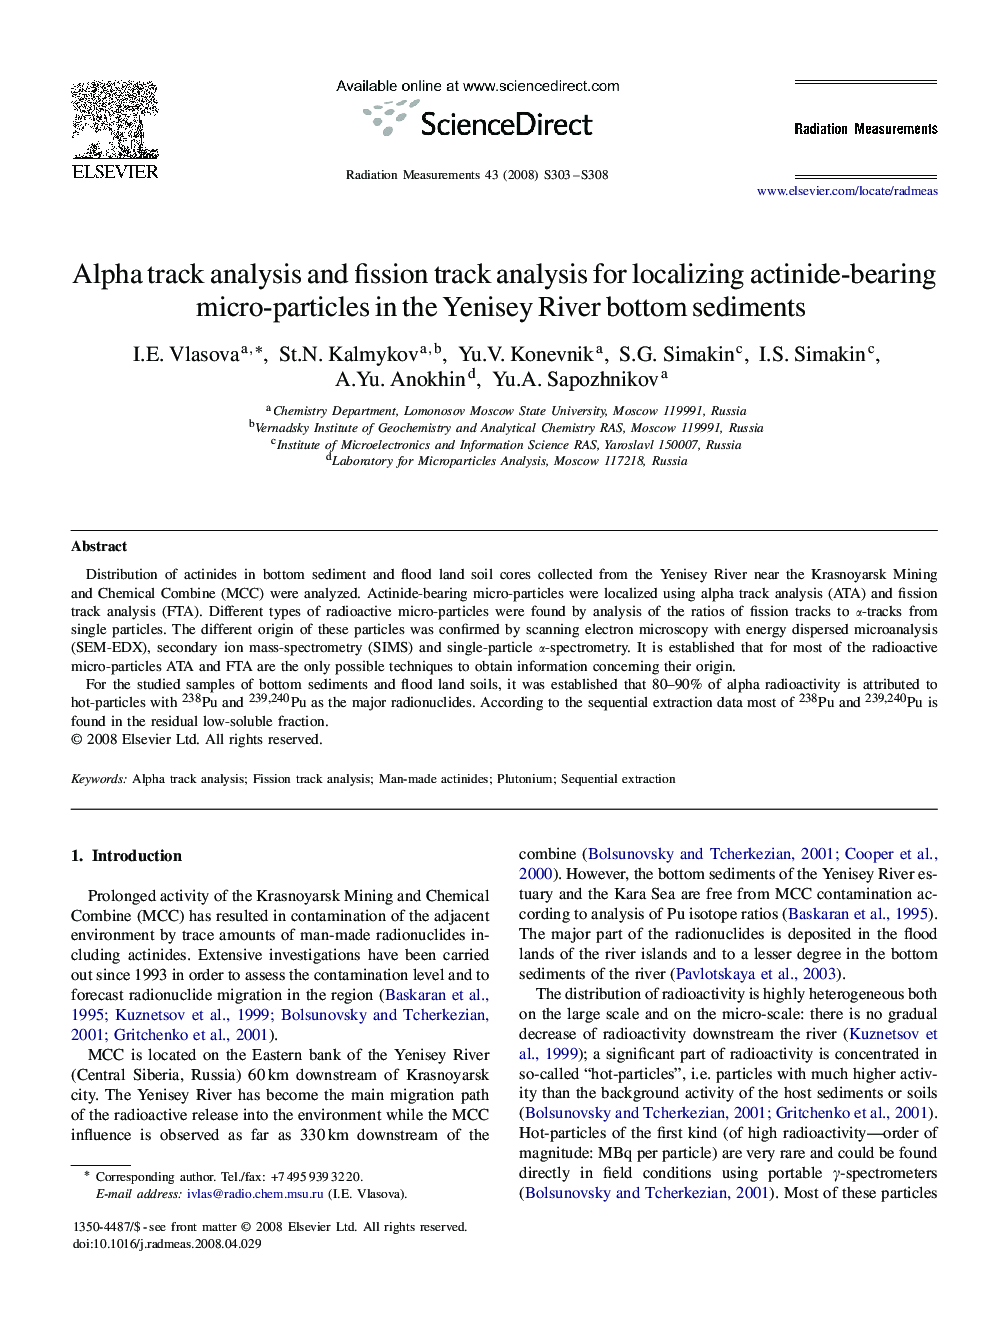 Alpha track analysis and fission track analysis for localizing actinide-bearing micro-particles in the Yenisey River bottom sediments